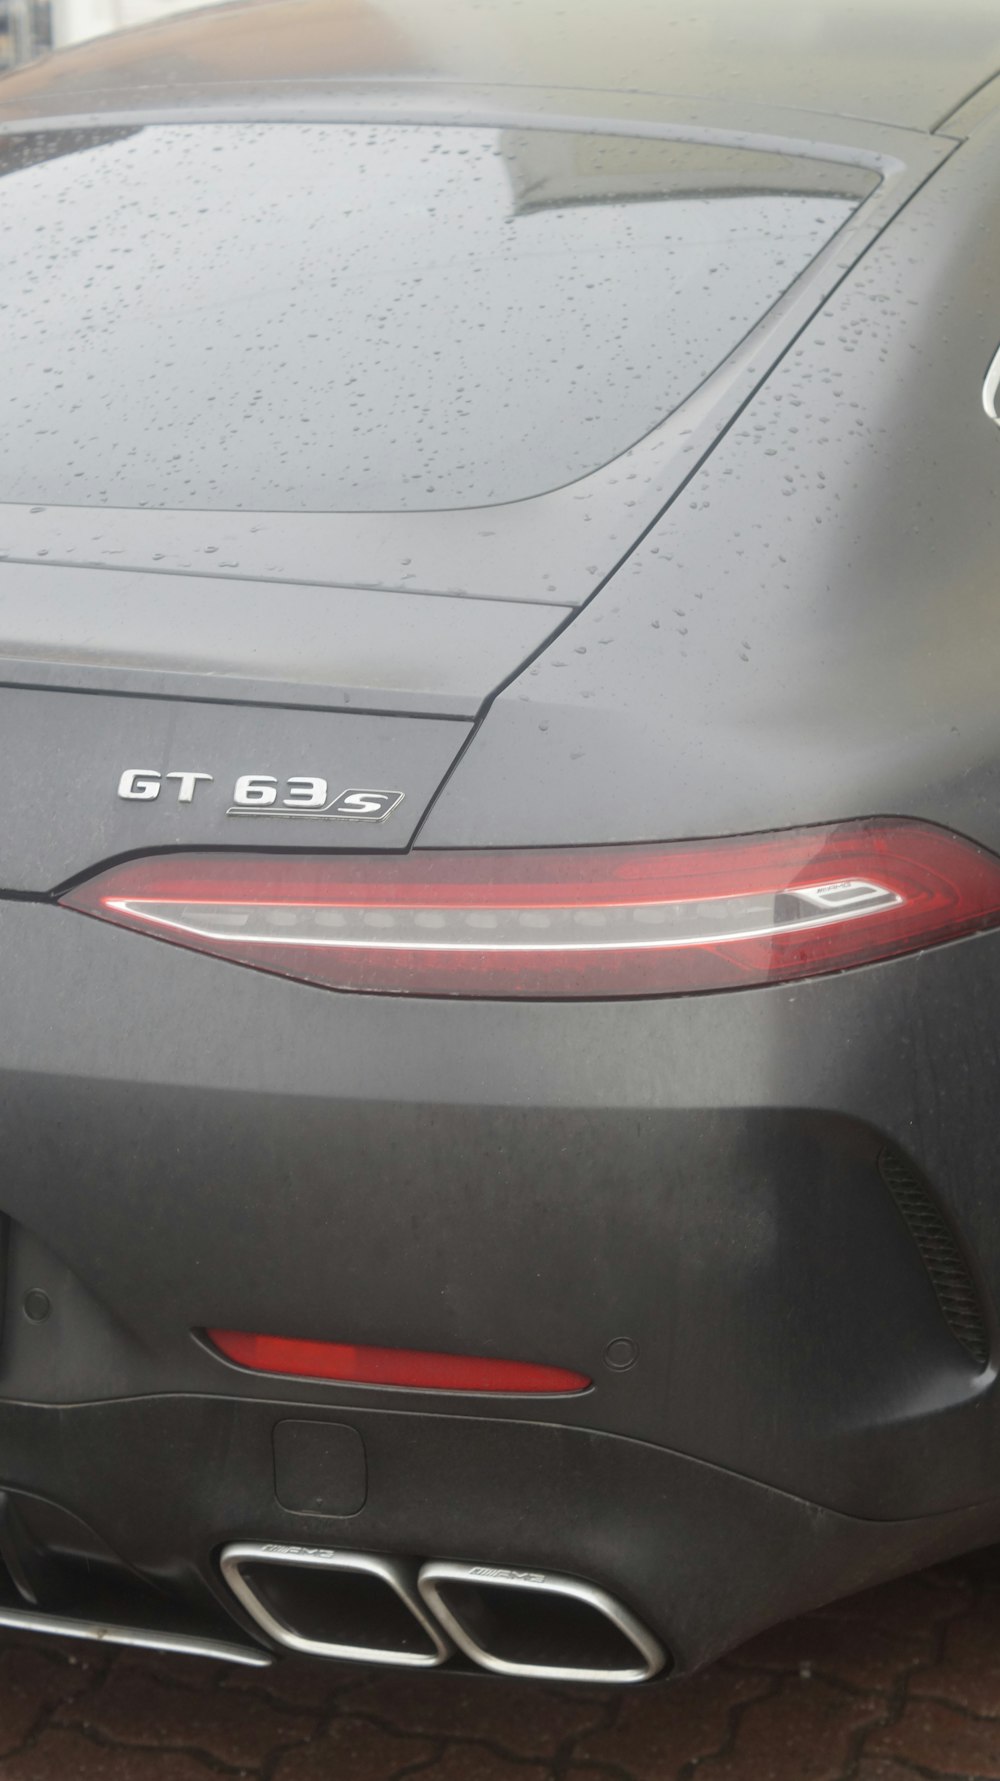 the rear end of a grey sports car